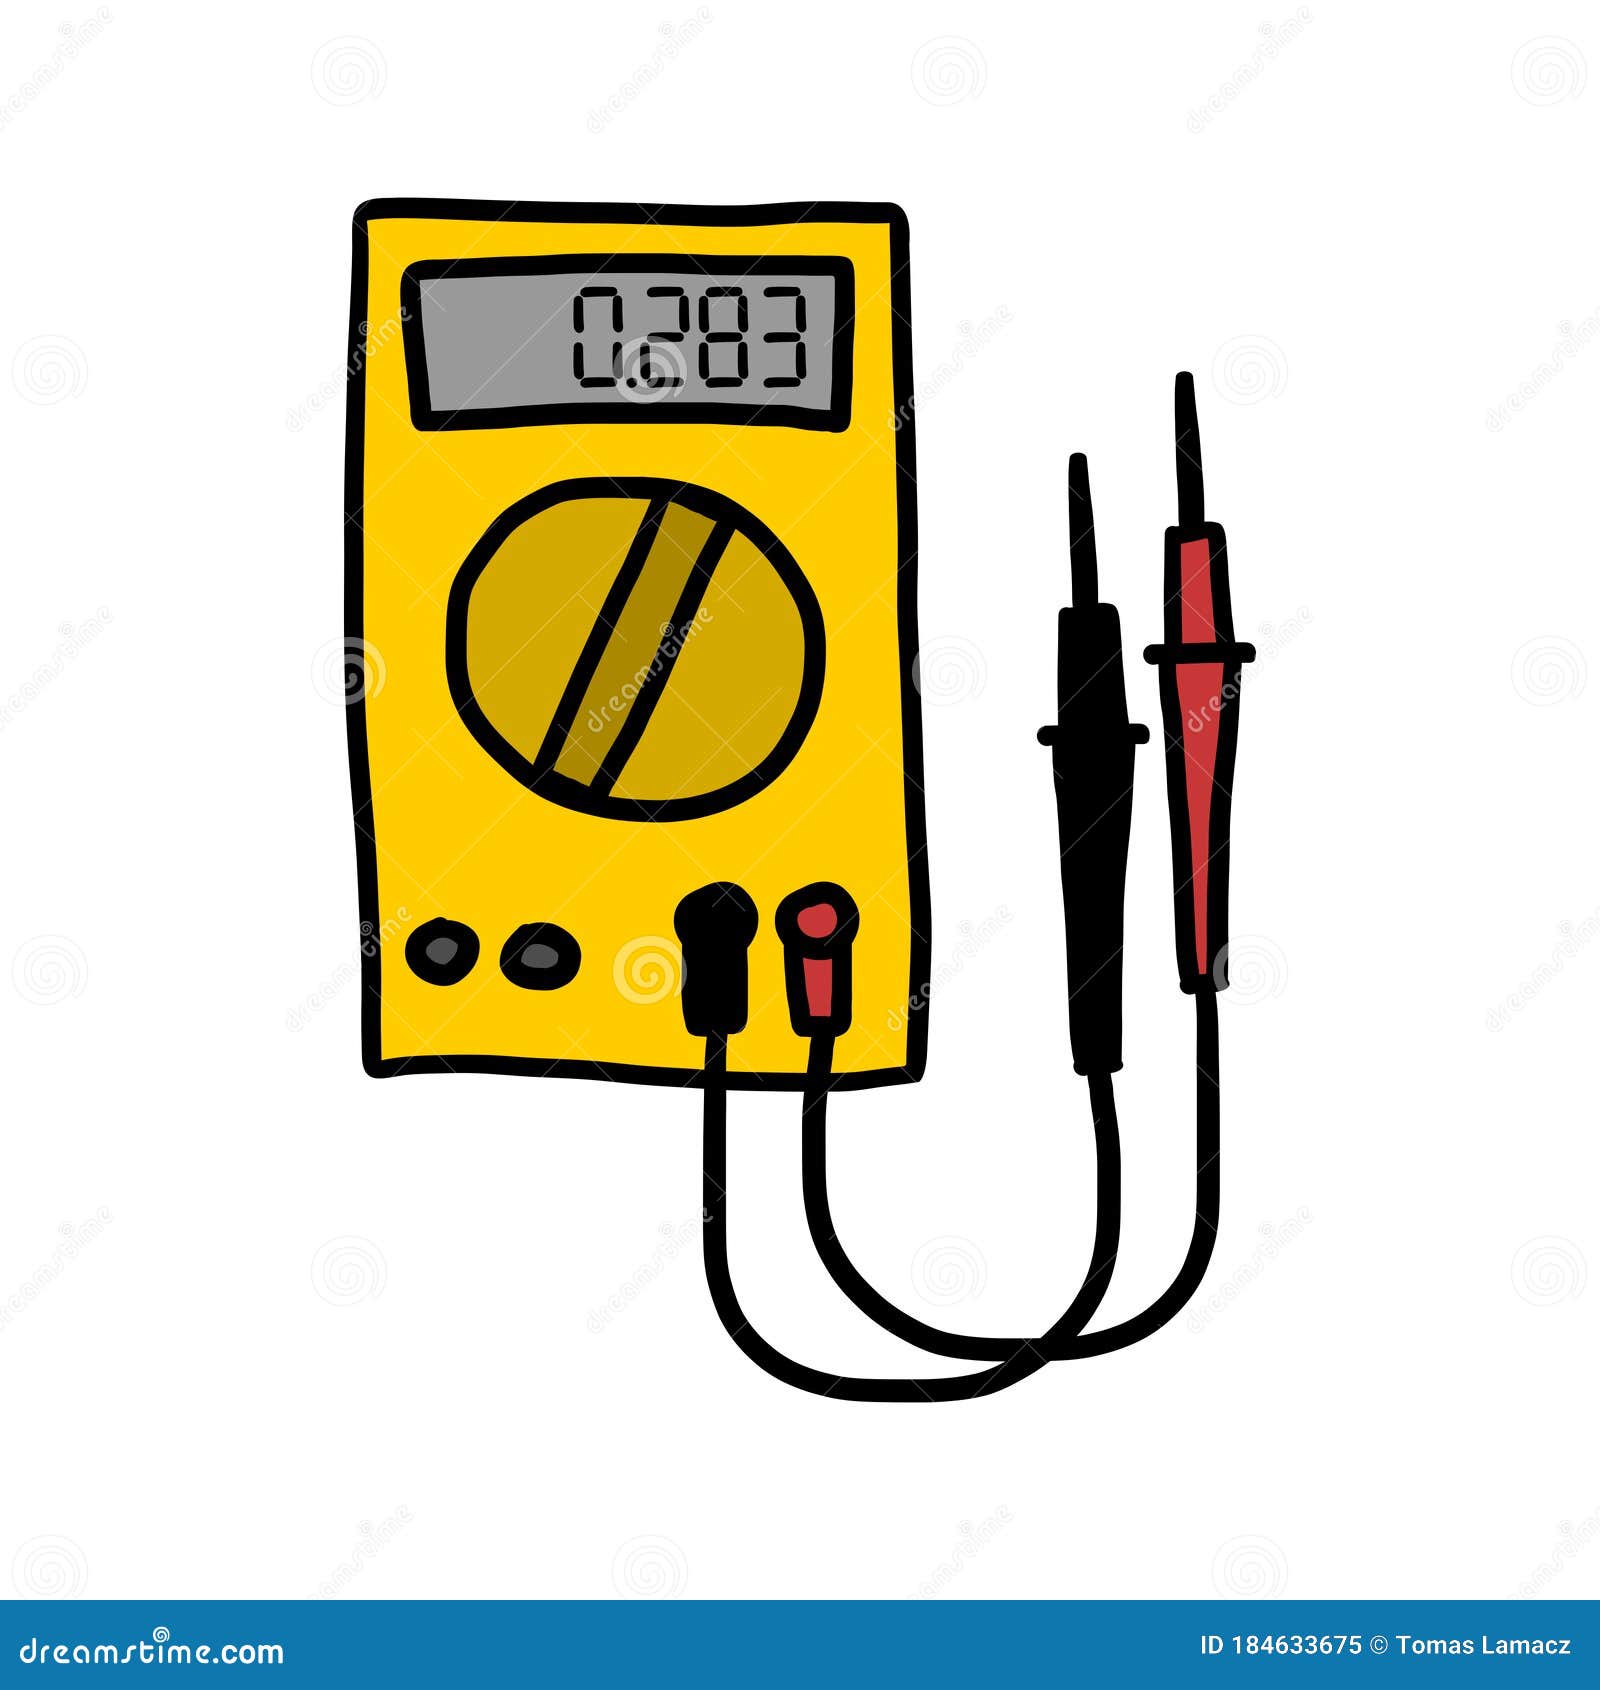 Hand Drawn Illustration of a Digital Multimeter, Electronic Device Used